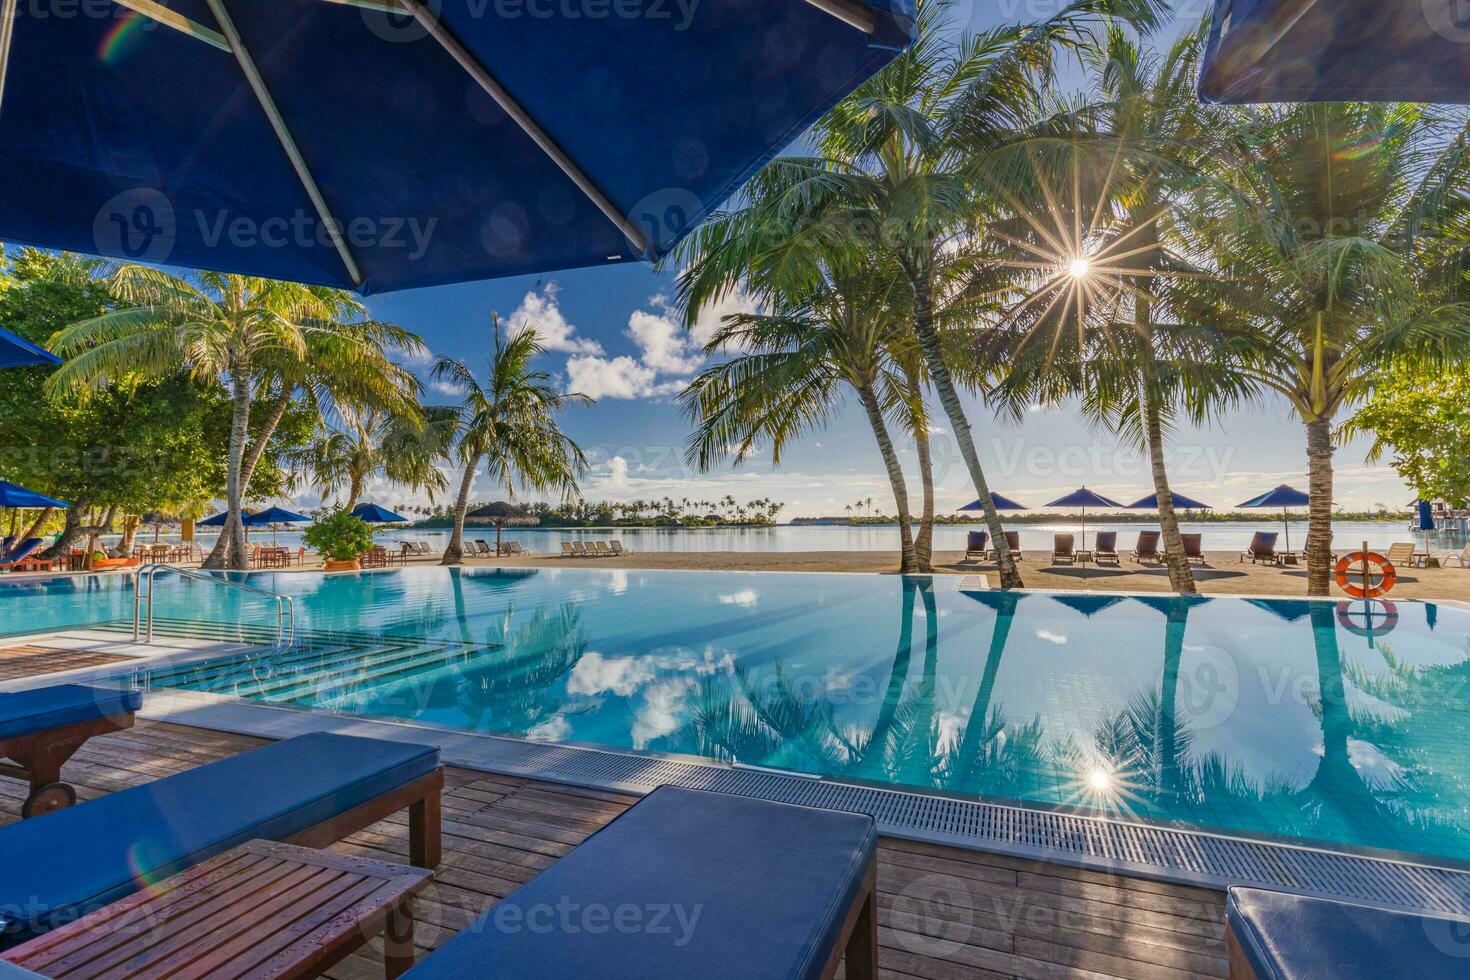 Fantastic summer mood with sun rays and palm trees over luxury infinity pool close to loungers and umbrella. Beautiful poolside and sunset sky. Luxurious tropical beach landscape. Luxury beach resort photo